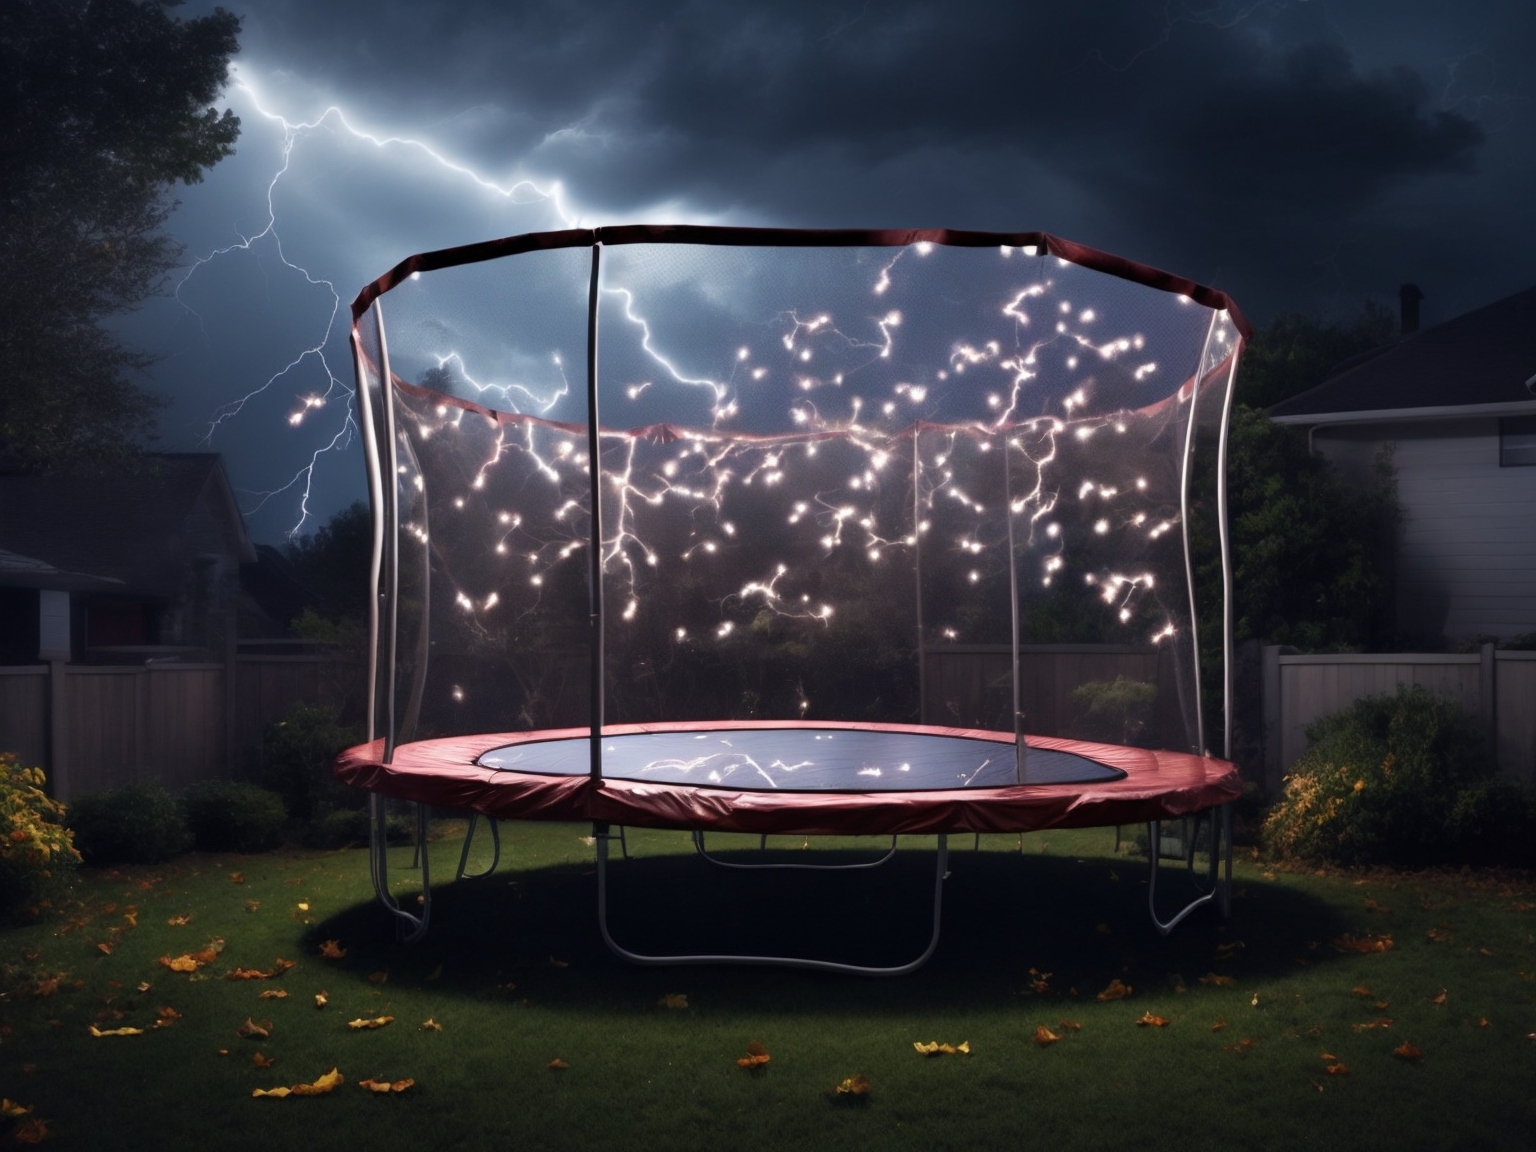 how much weight to hold down a trampoline on a windy, stormy night